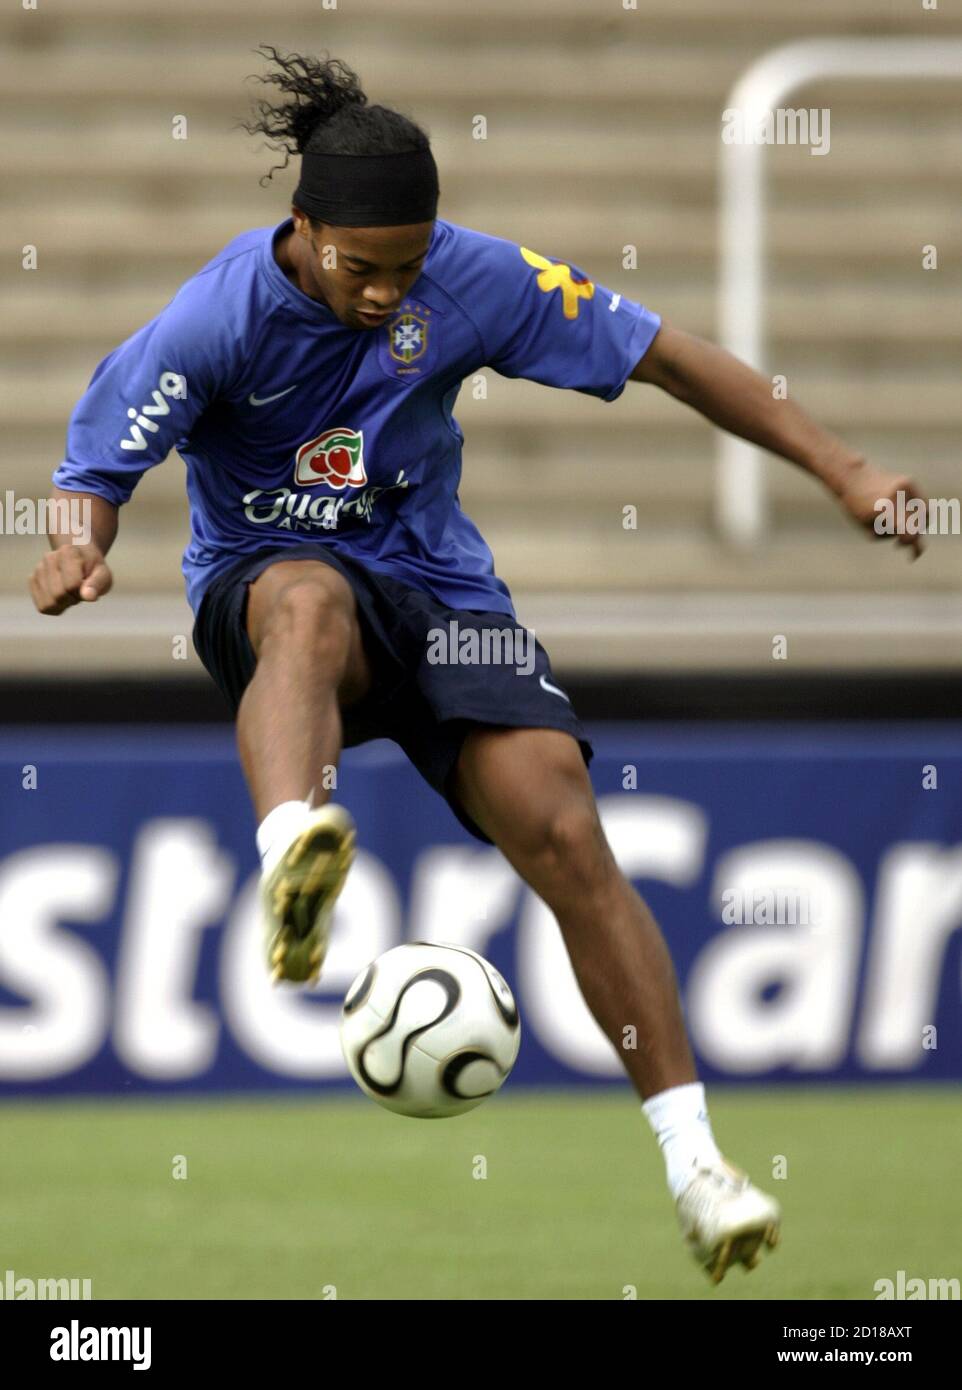 Brazil's Ronaldinho controls the ball at a soccer training session in Bergisch  Gladbach during the World Cup soccer tournament June 26, 2006.  REUTERS/Paulo Whitaker (GERMANY Stock Photo - Alamy